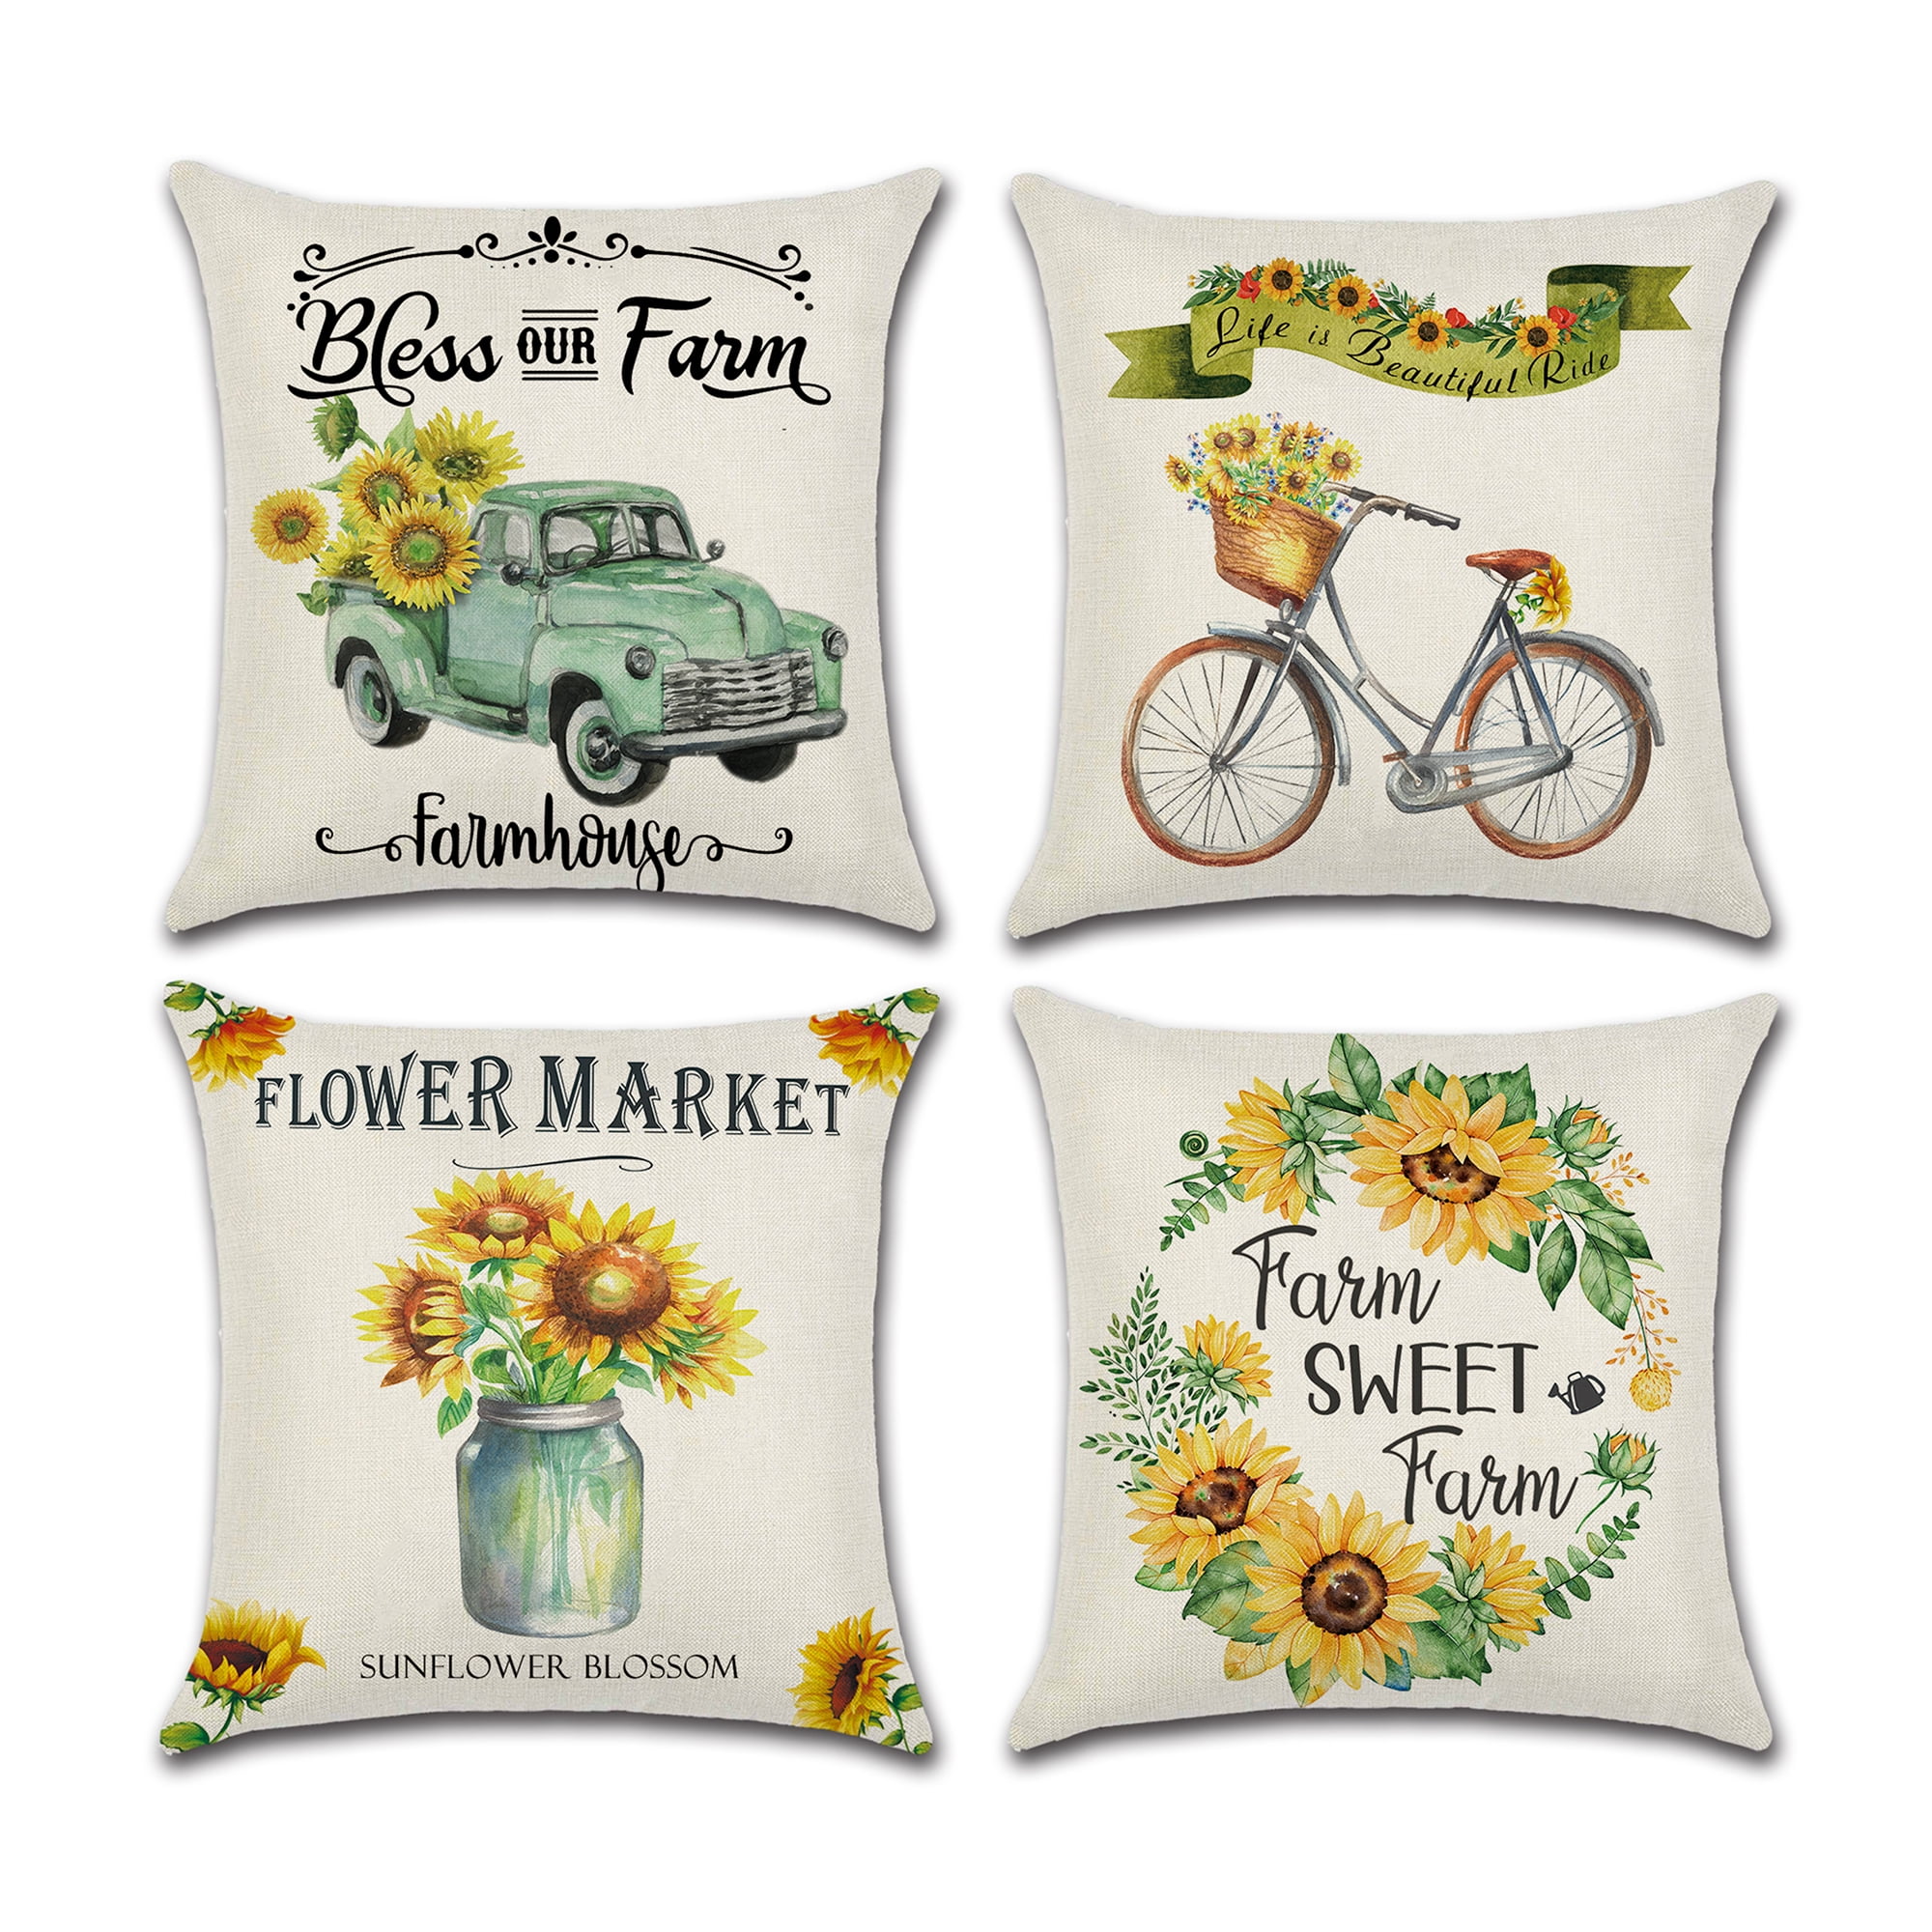 HGOD DESIGNS Cushion Cover Advice From A Sunflower Quotes Print,Throw Pillow Case Home Decorative for Men/Women Living Room Bedroom Sofa Chair 18X18 Inch Pillowcase 45X45cm